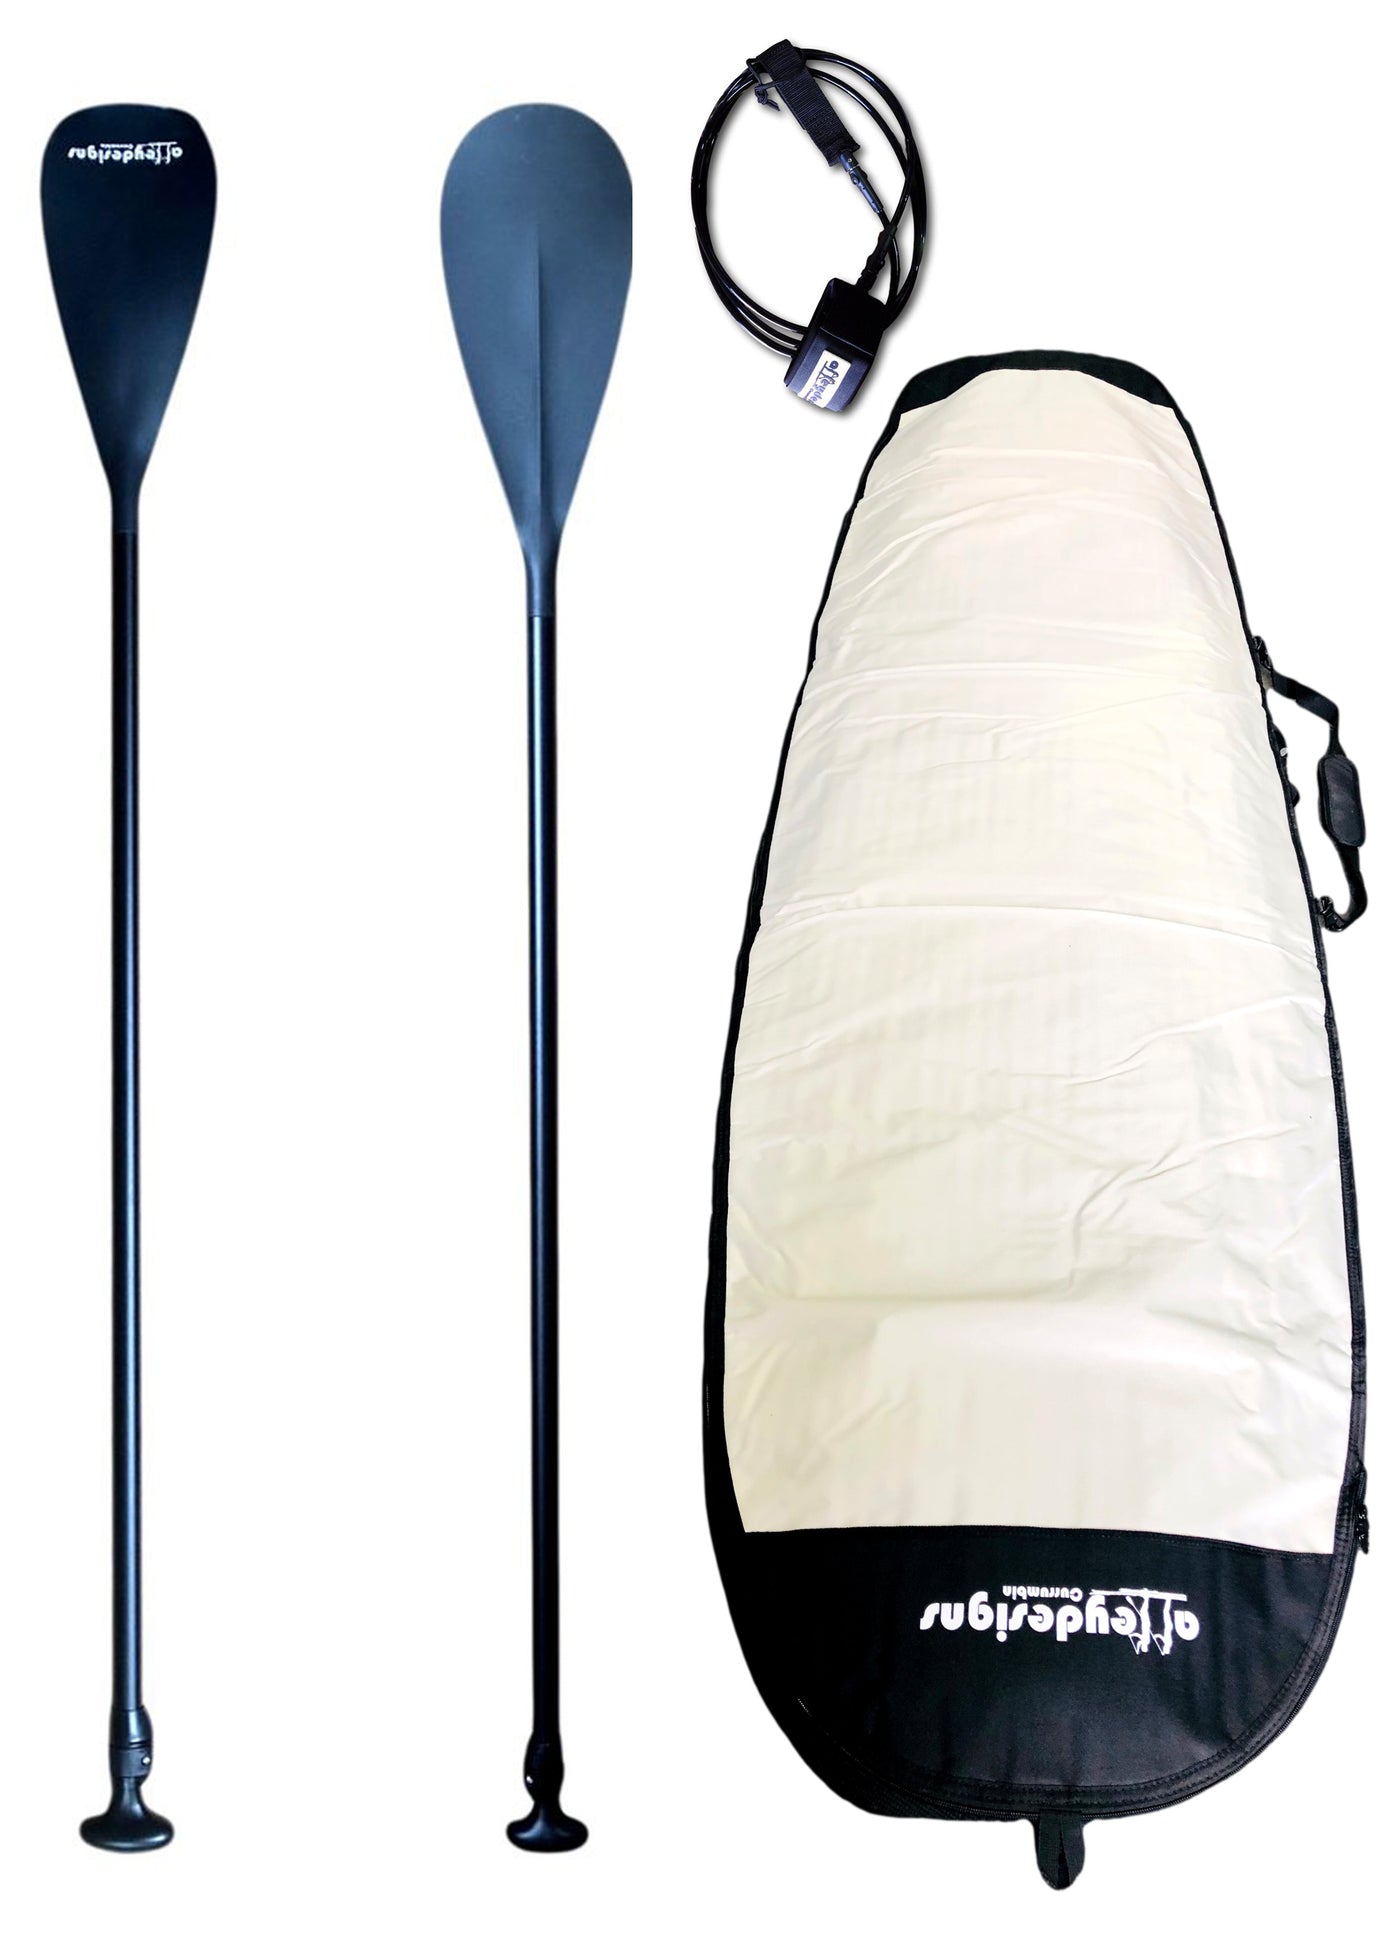 $250 SUP PADDLE ALLOY / PLASTIC ADJUSTABLE PADDLE & BOARD BAG  & LEG ROPE PACKAGE - Alleydesigns  Pty Ltd                                             ABN: 44165571264